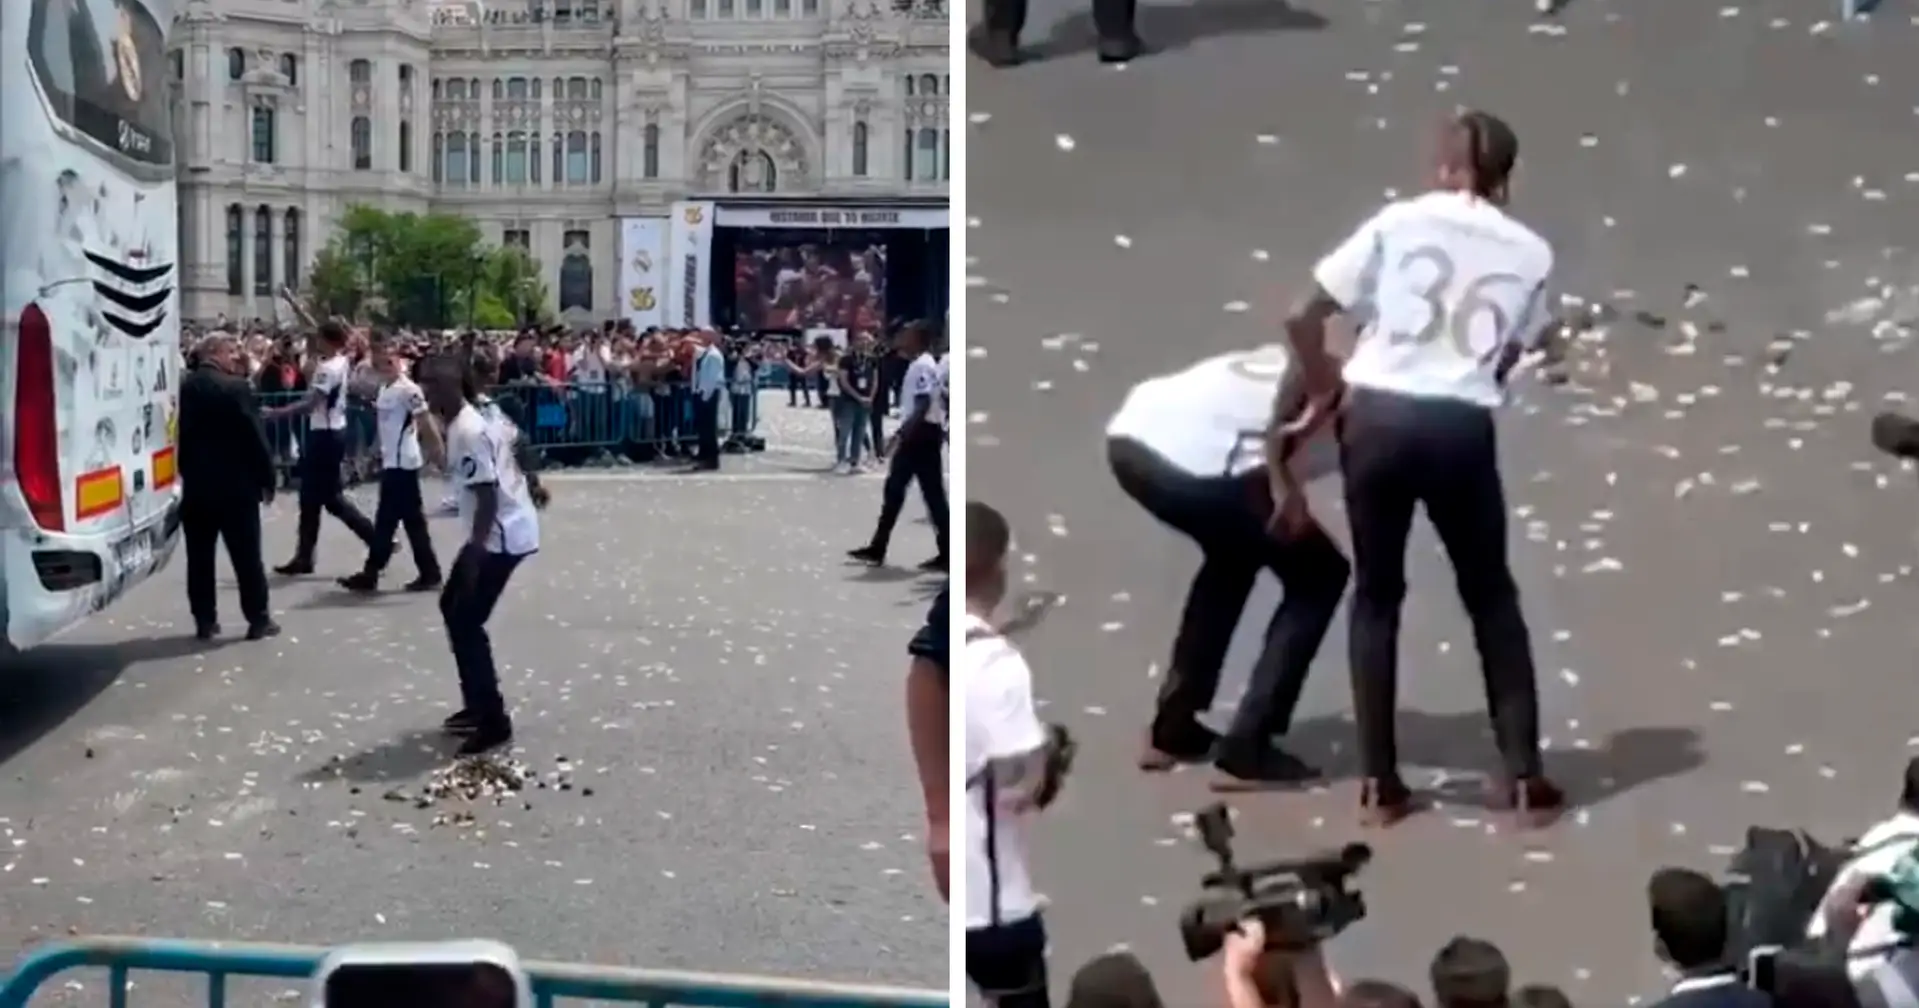 Camavinga stepped on horse sh*t during the celebrations - Rudiger's reaction is hilarious (video)